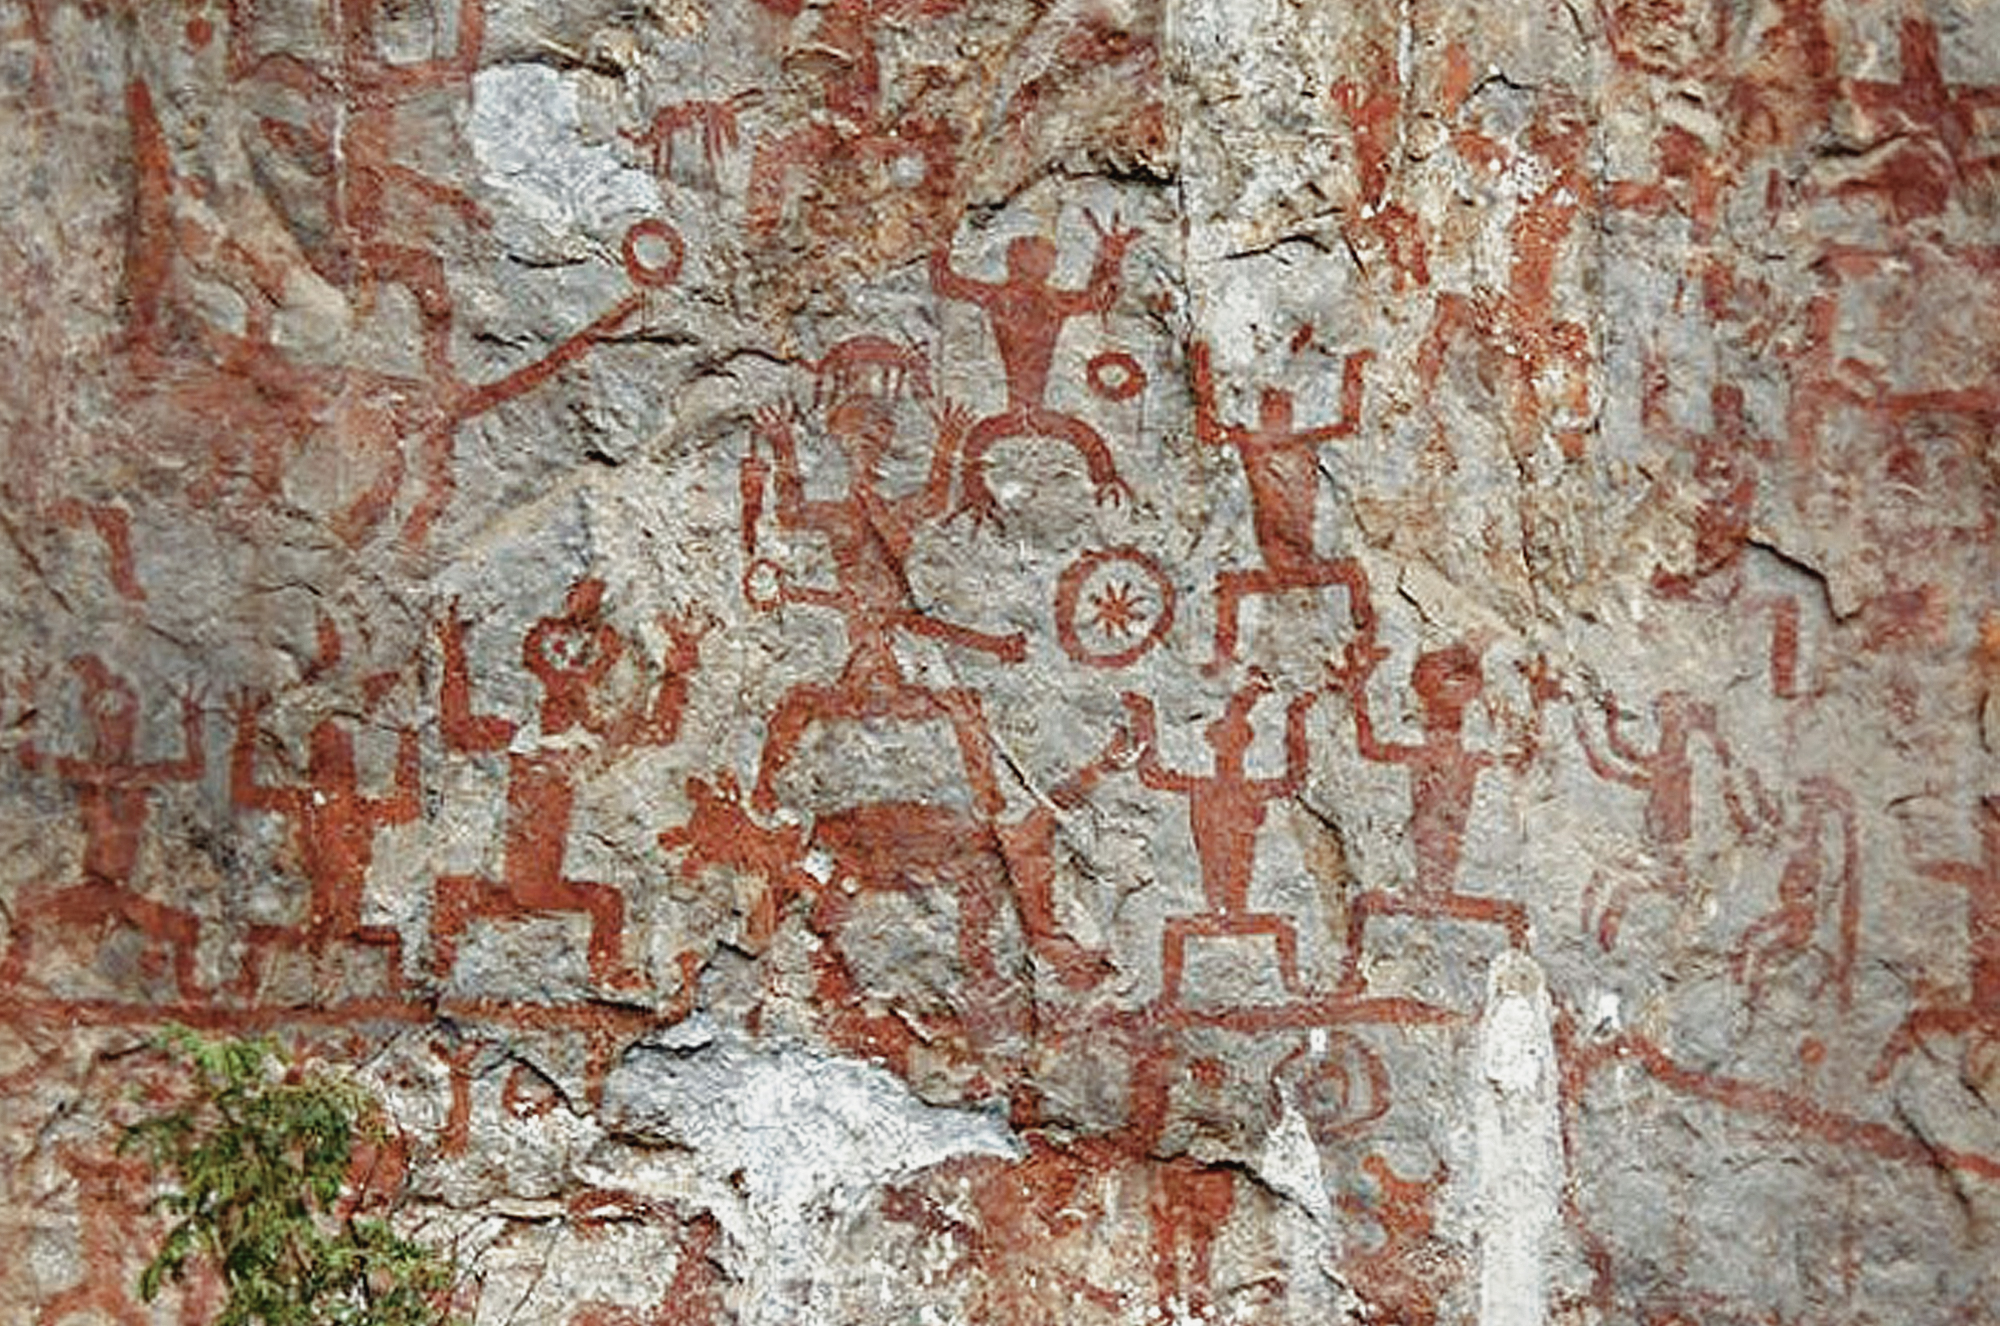 A part of the Huashan rock art panel Archaeology China